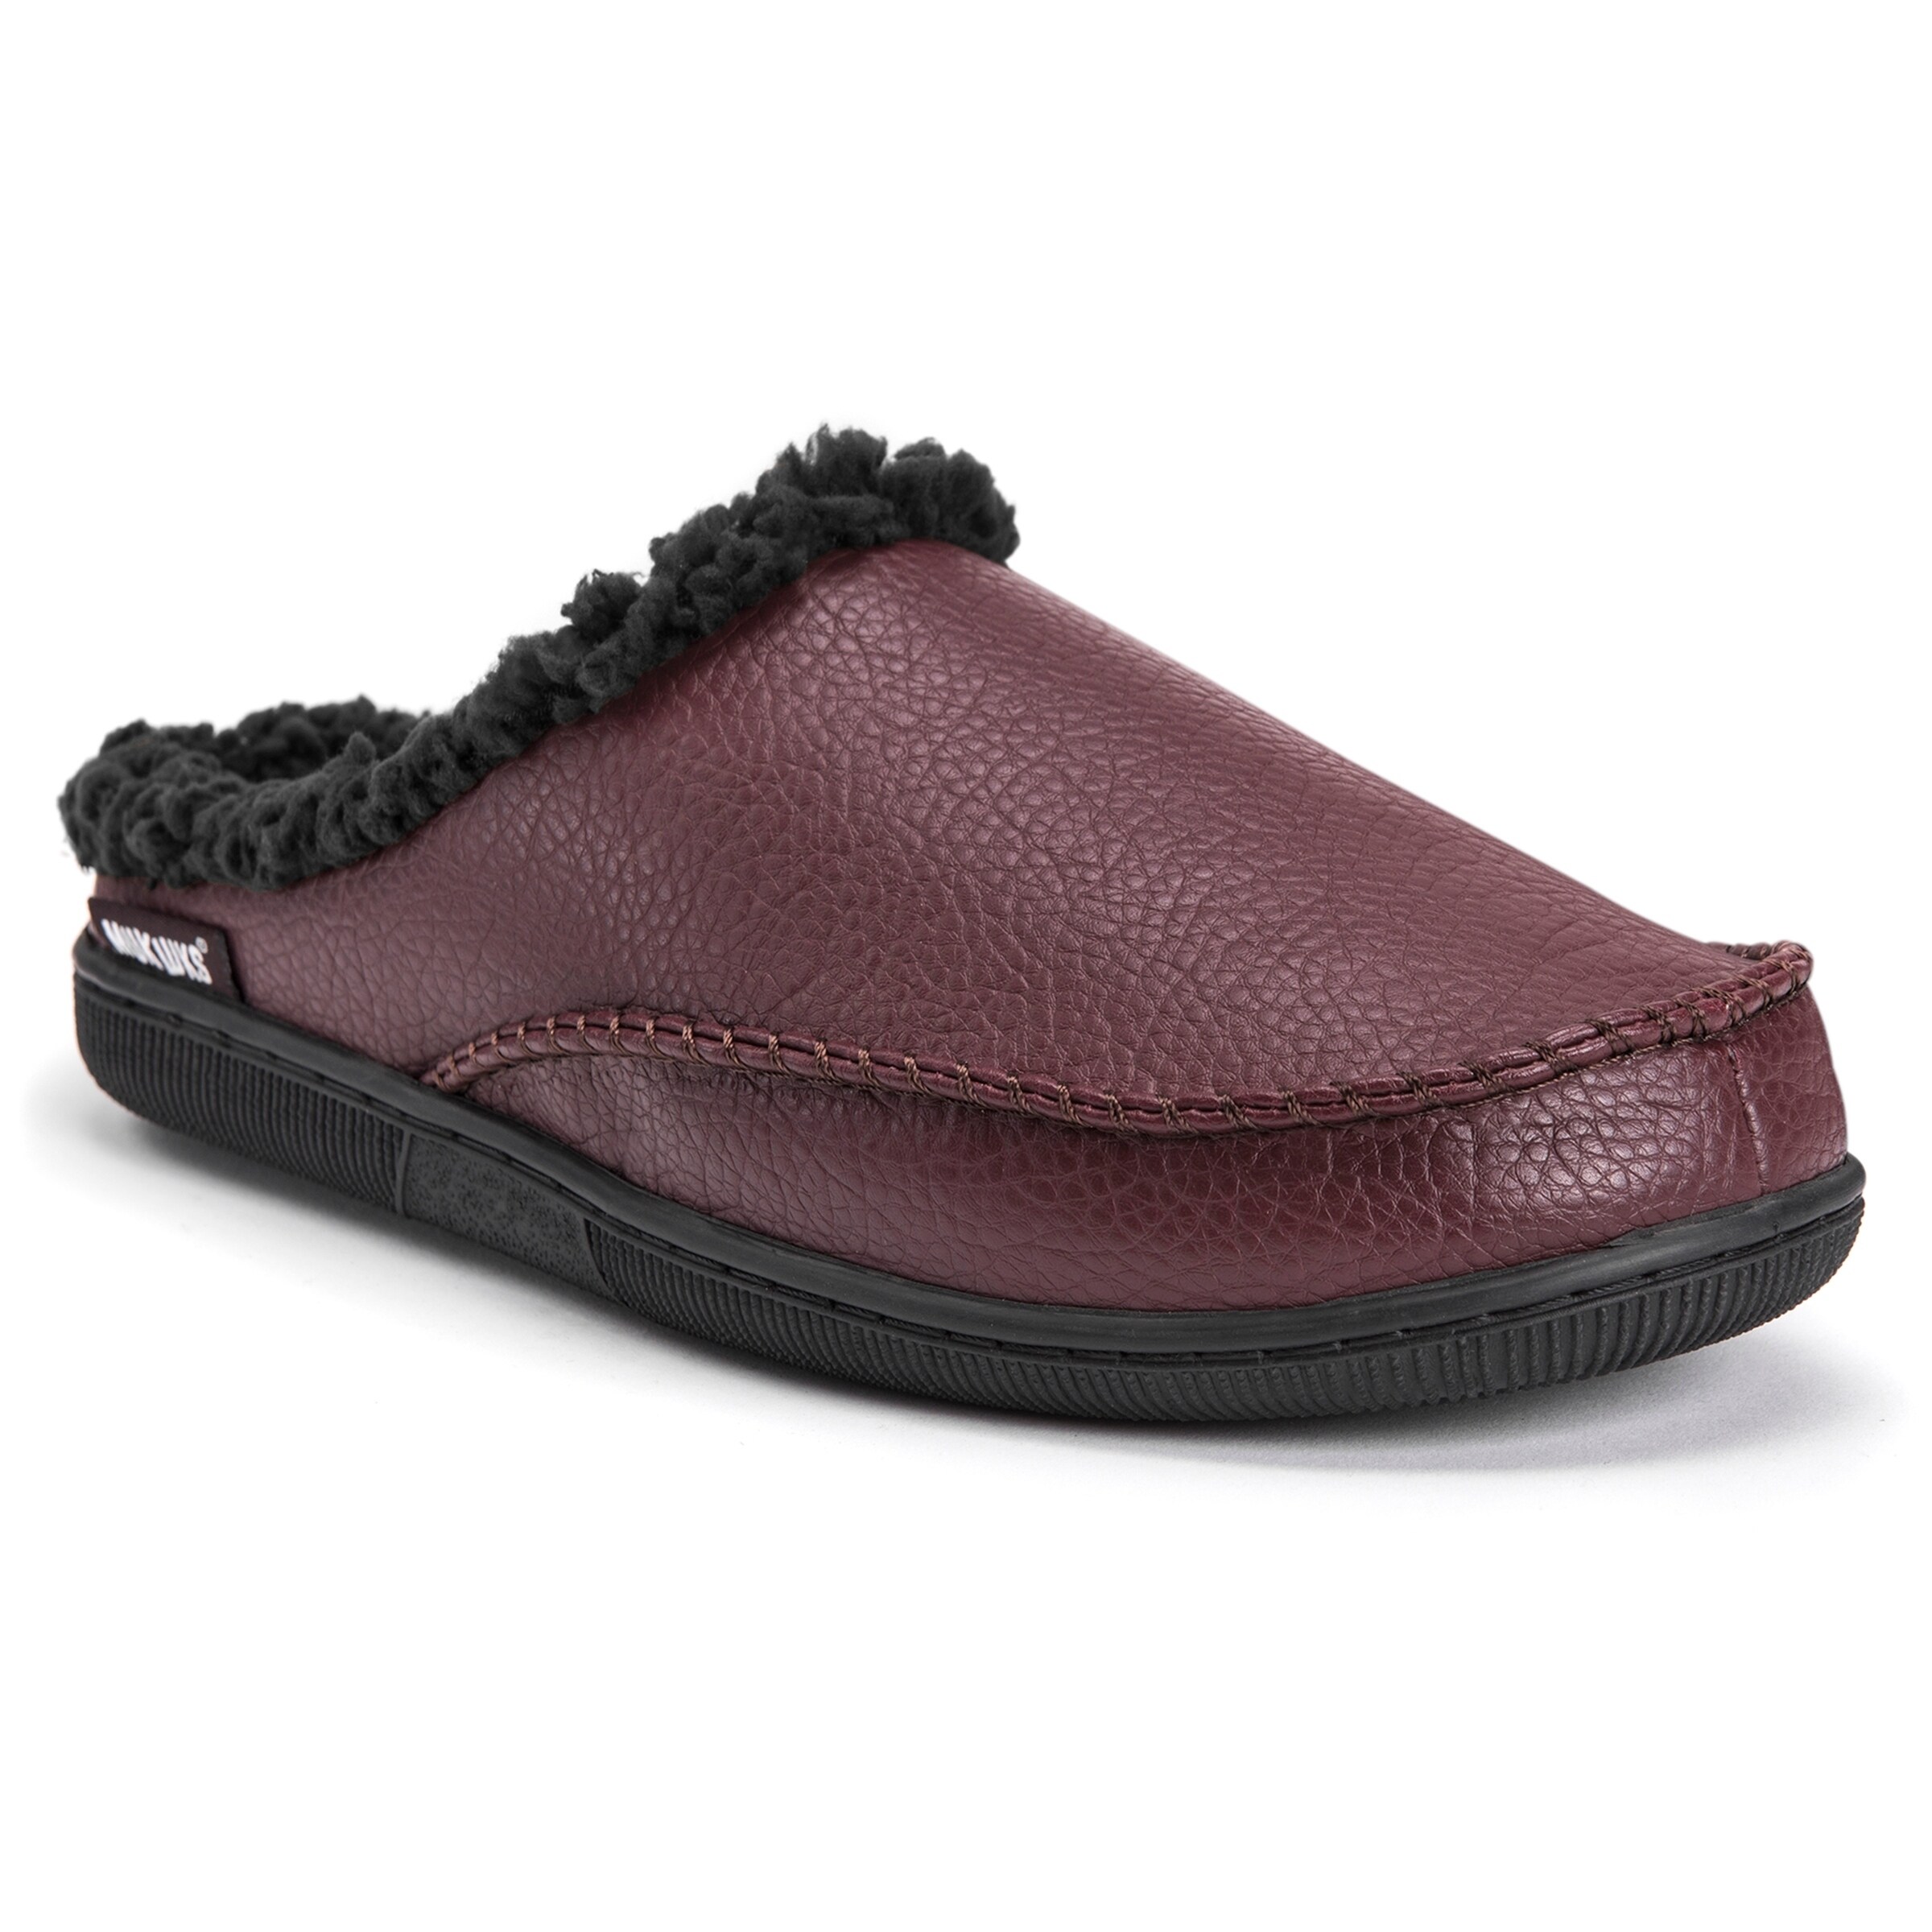 mens leather clog slippers